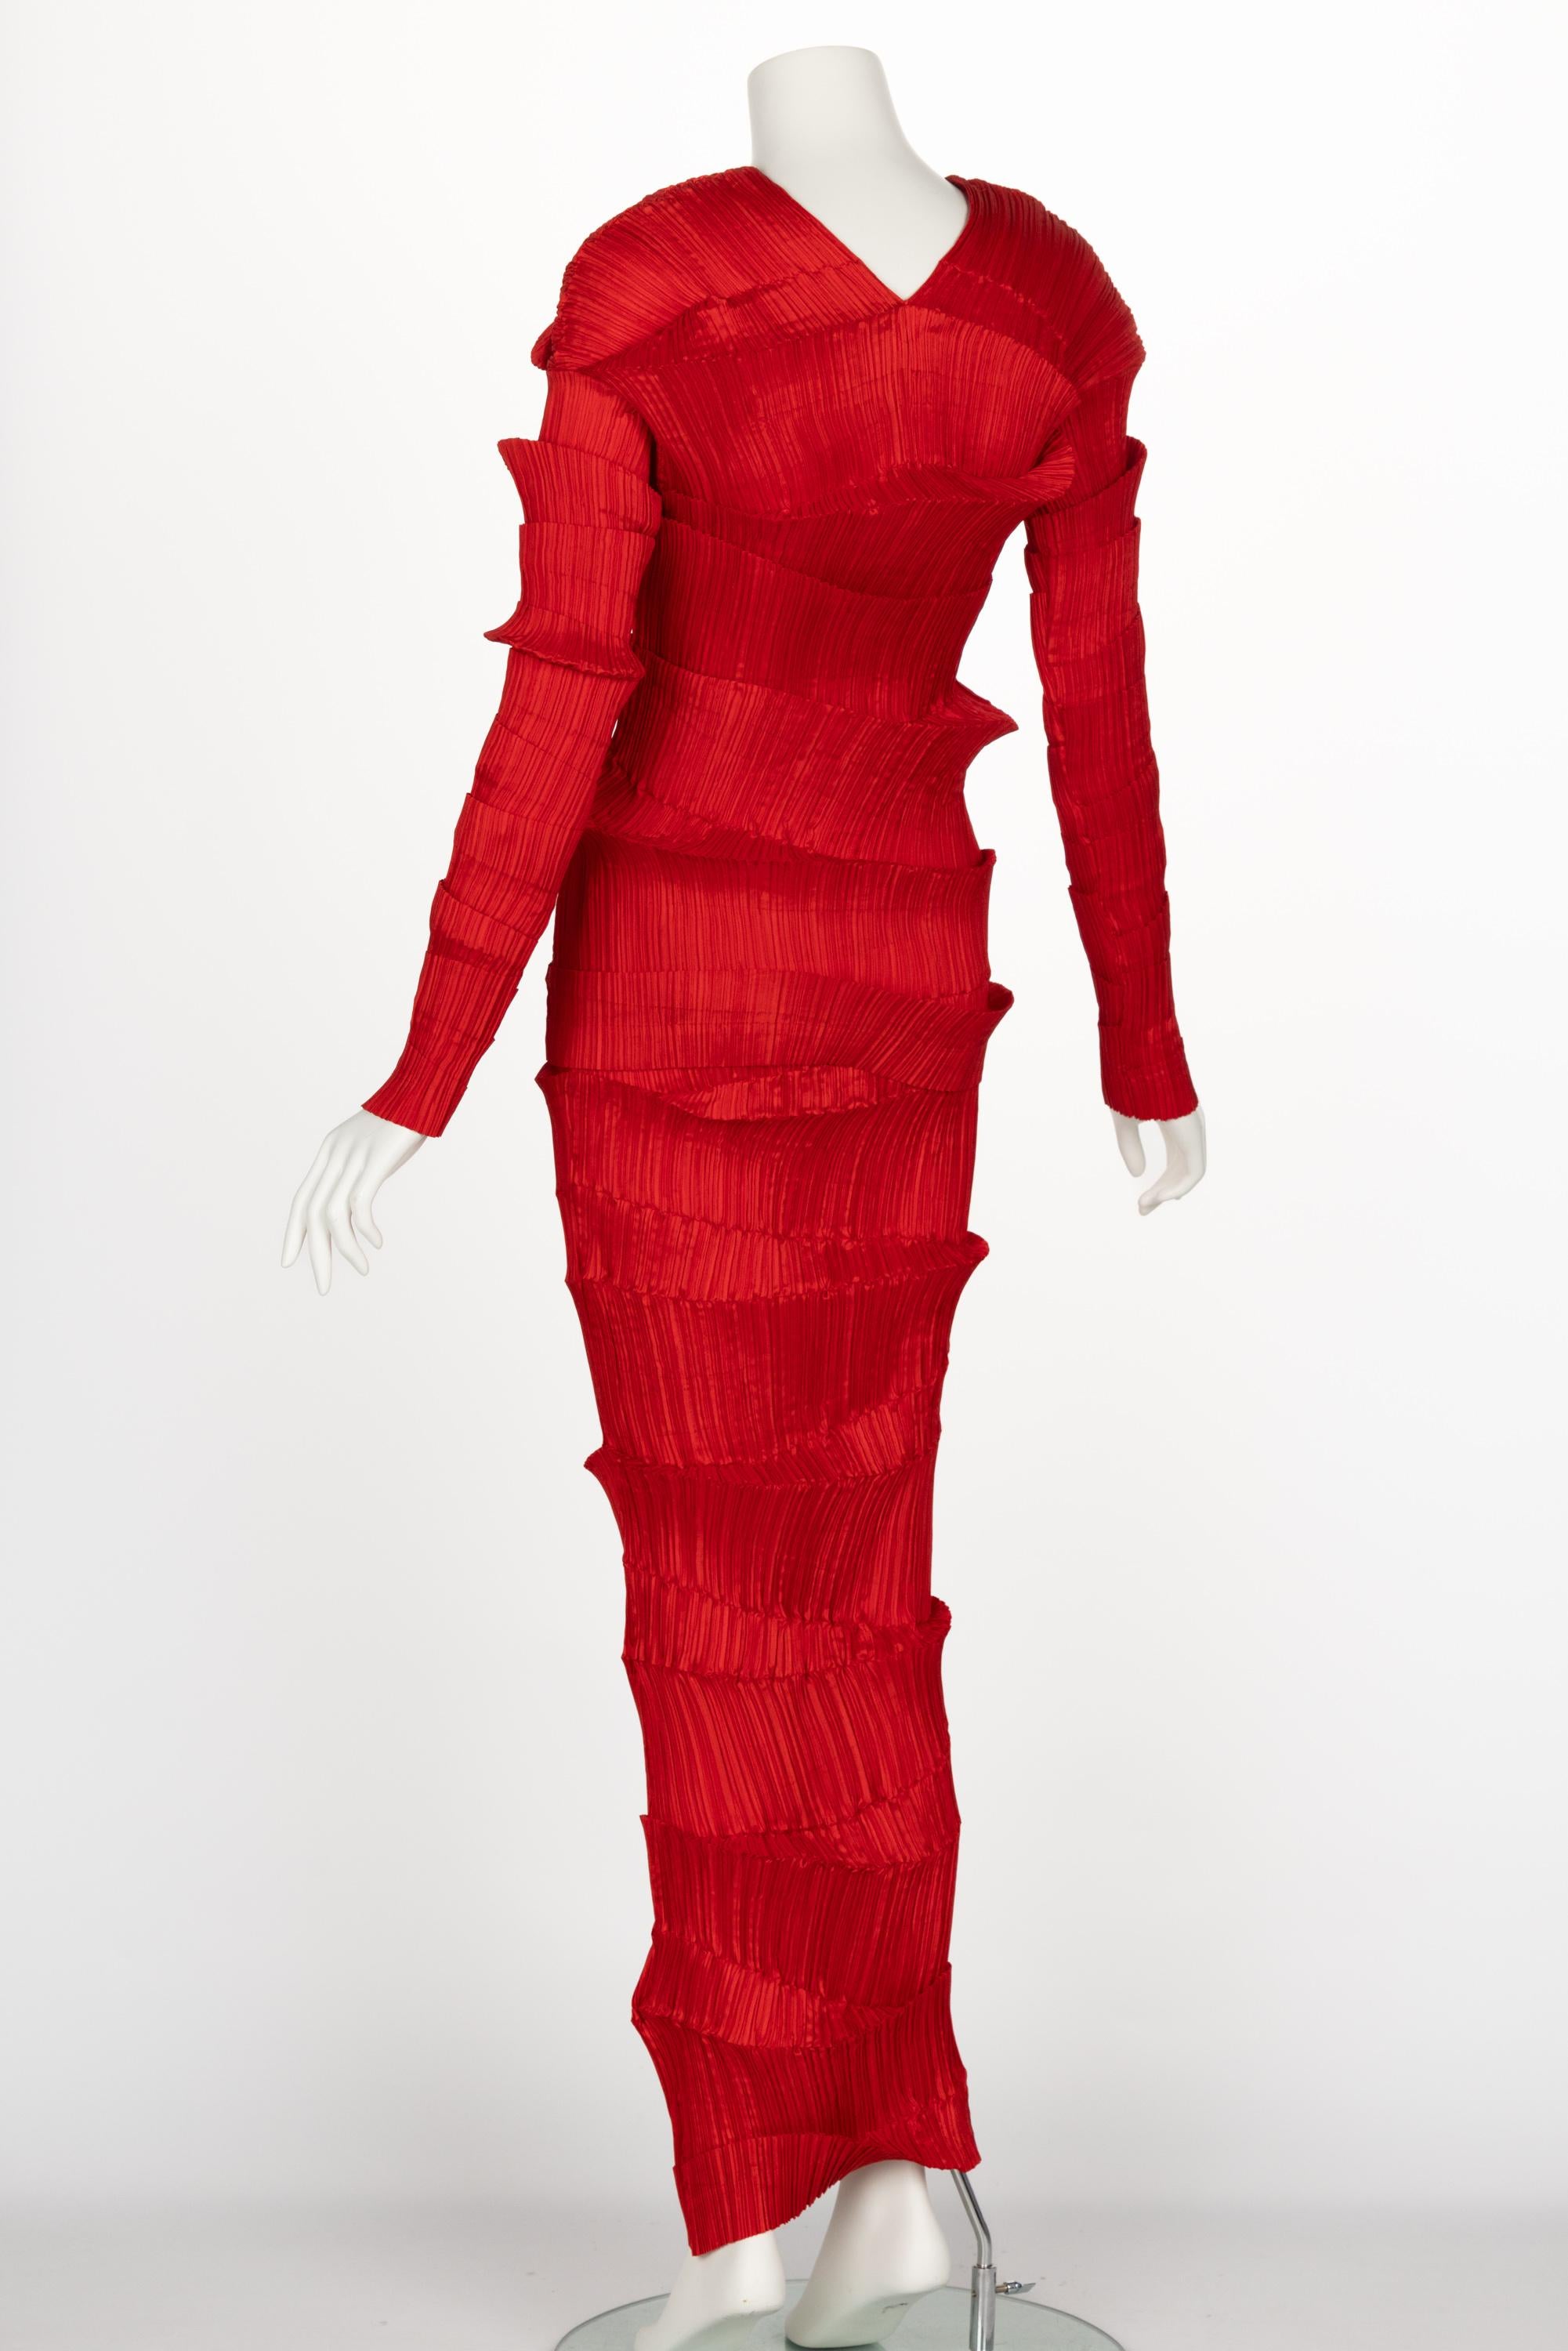 Incredible 1990s Issey Miyake Pleated Red Top & Skirt Ensemble For Sale 3